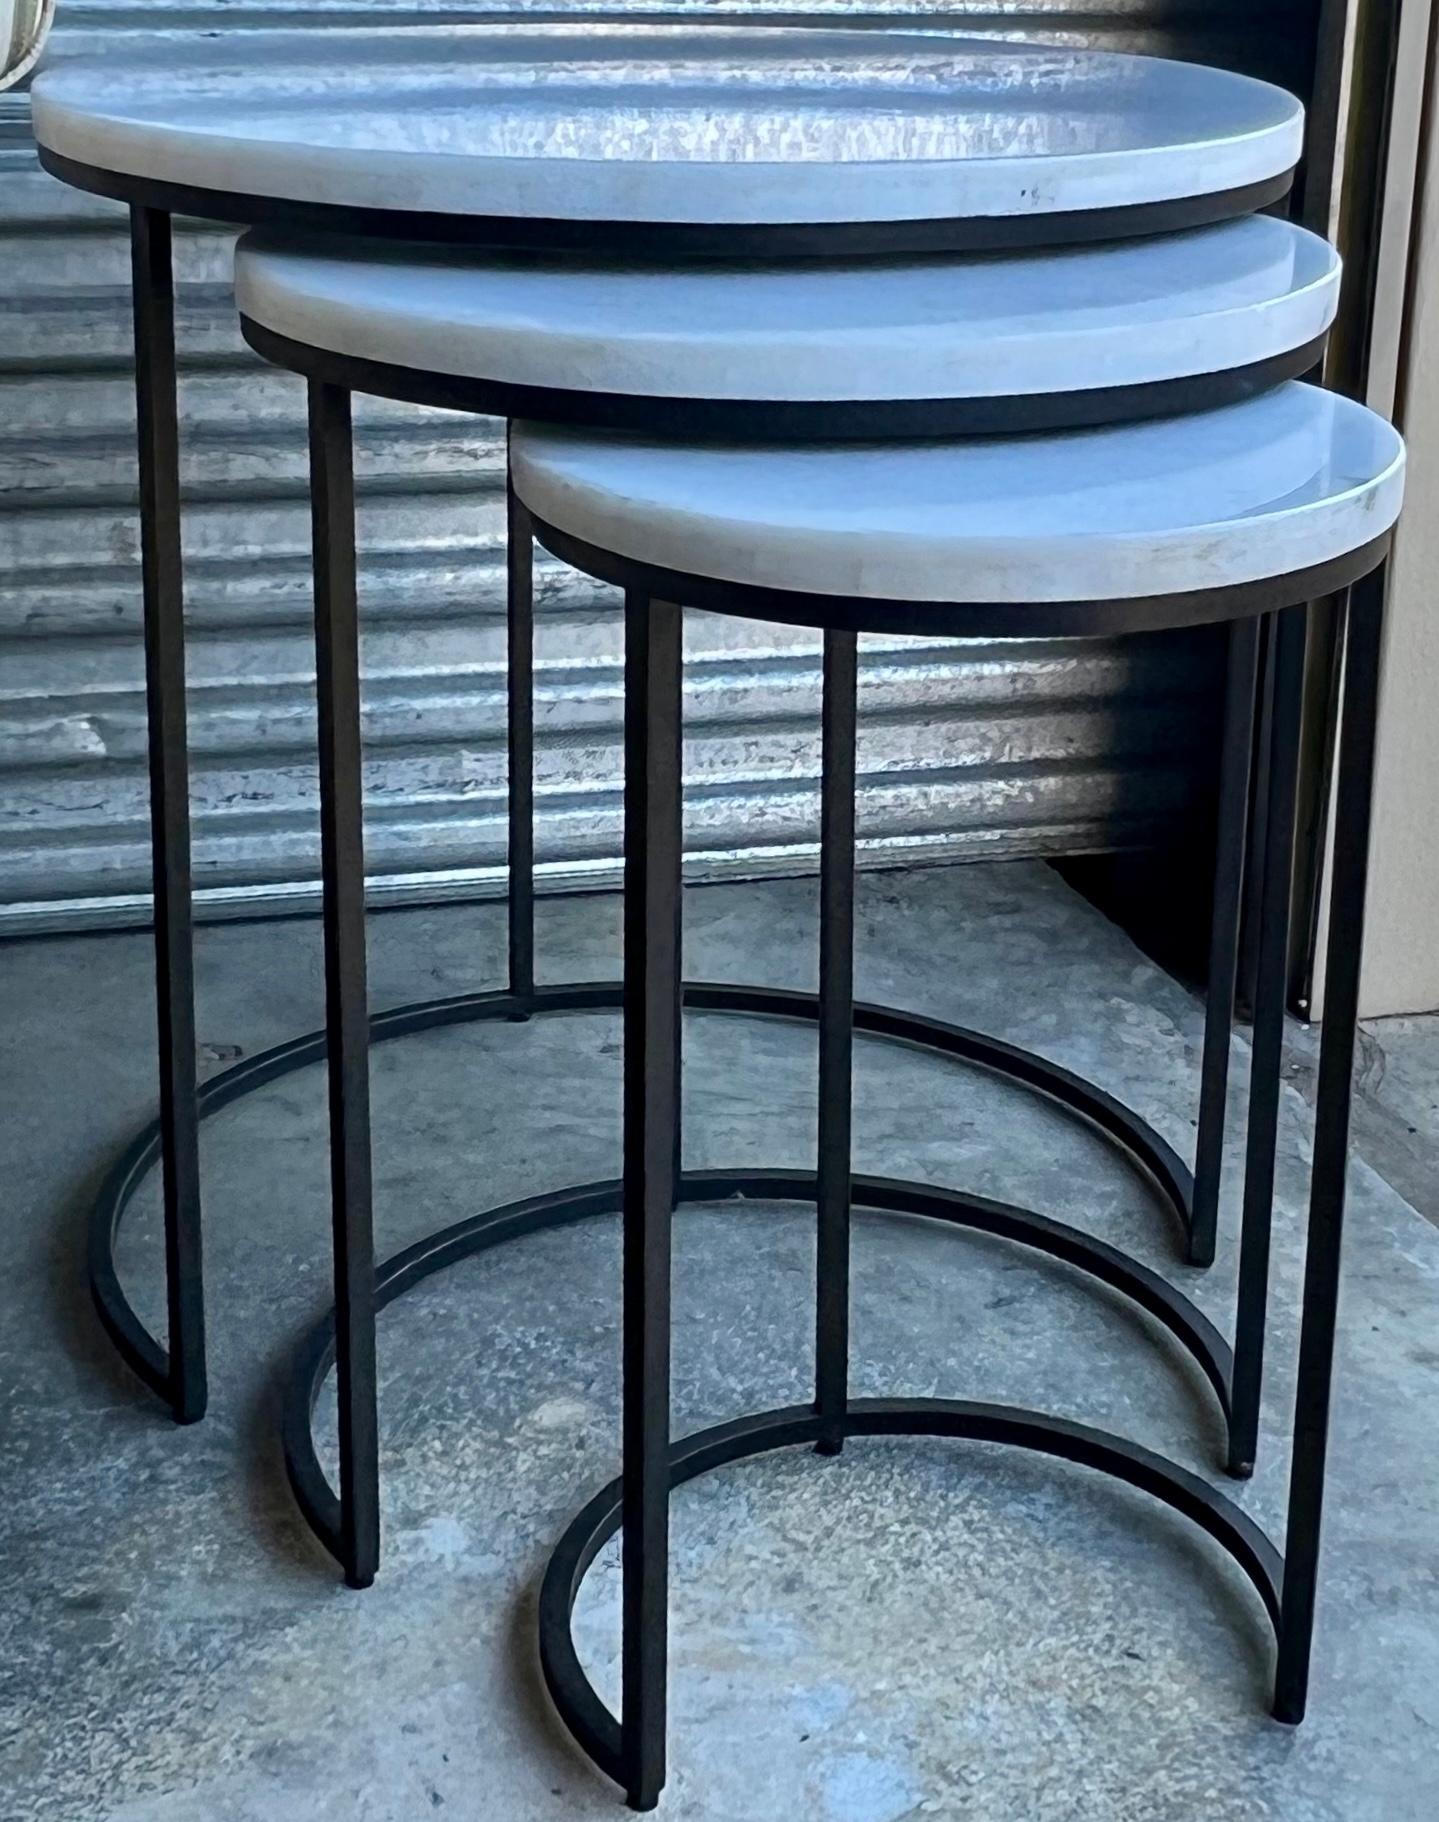 20th Century Late 20th-C. Modern Iron & Marble Nesting Tables by Mitchell Gold & Bob William